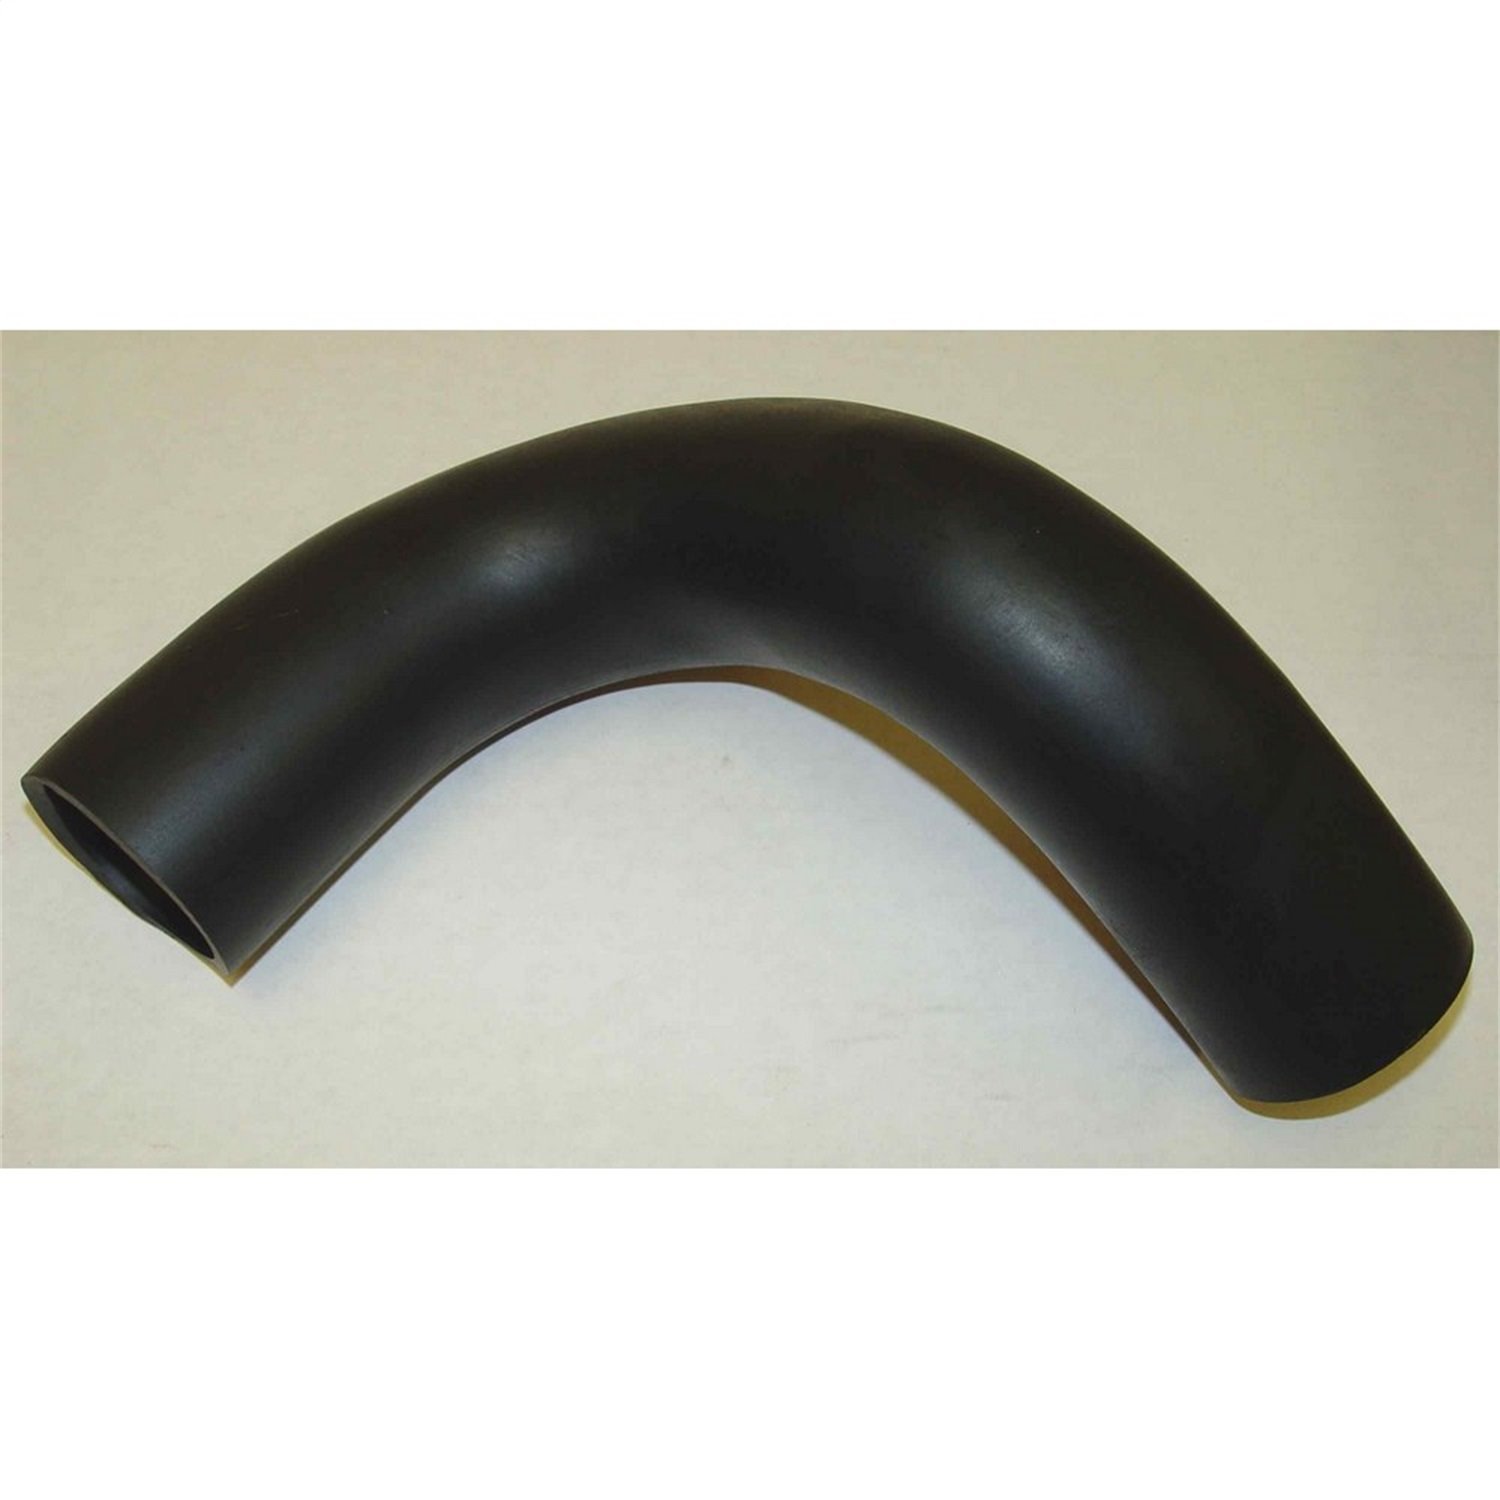 Replacement fuel filler hose from Omix-ADA has a 2.25 inch inside diameter and, Fits 76-77 Jeep CJ-5s and 76 CJ-7s.